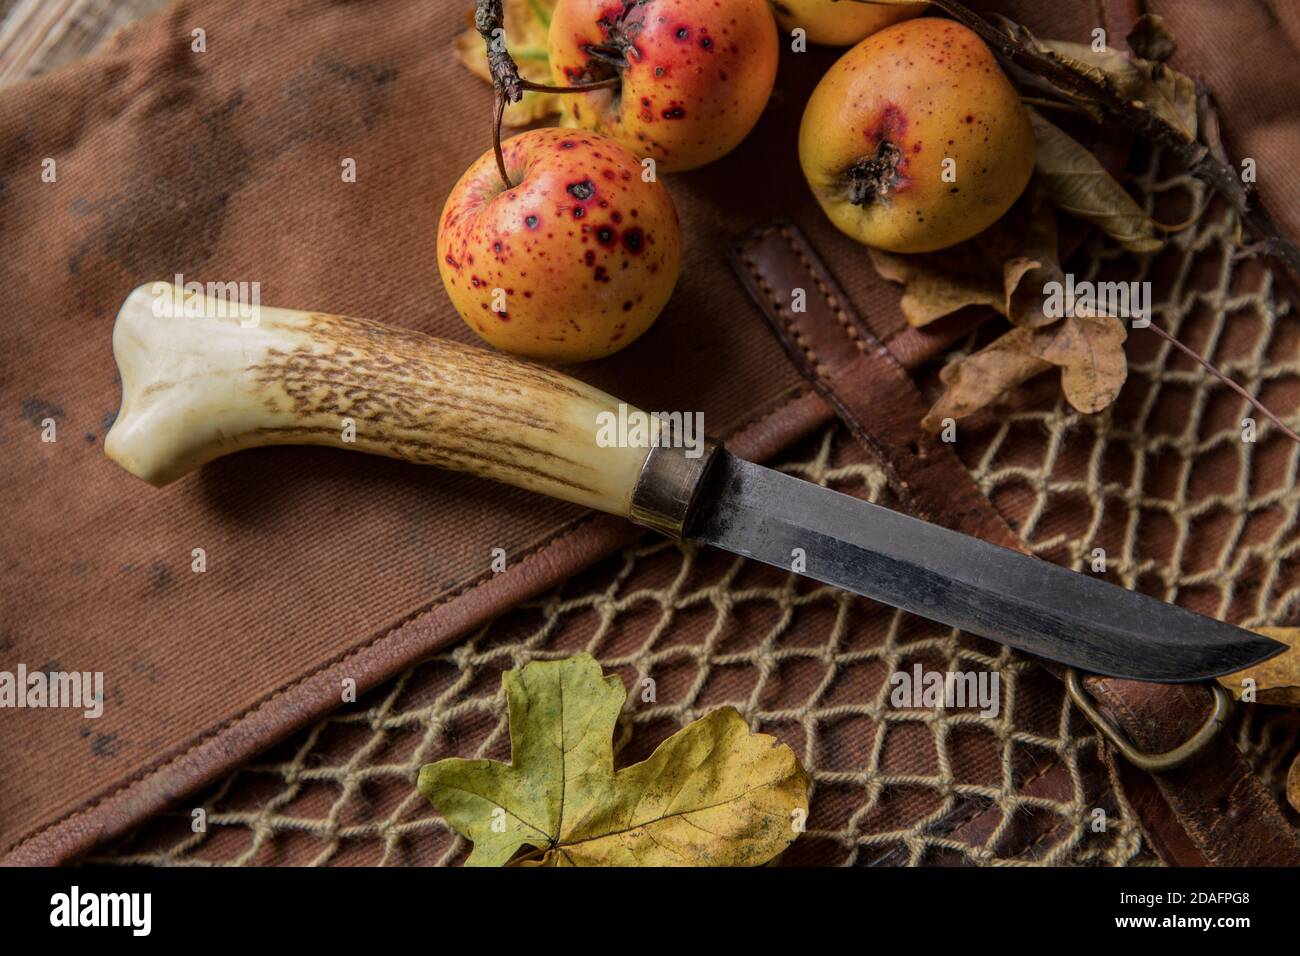 https://c8.alamy.com/comp/2DAFPG8/a-knife-with-a-staghorn-handle-that-has-been-homemade-displayed-on-an-old-shooting-bag-with-foraged-wild-apples-dorset-england-uk-gb-2DAFPG8.jpg